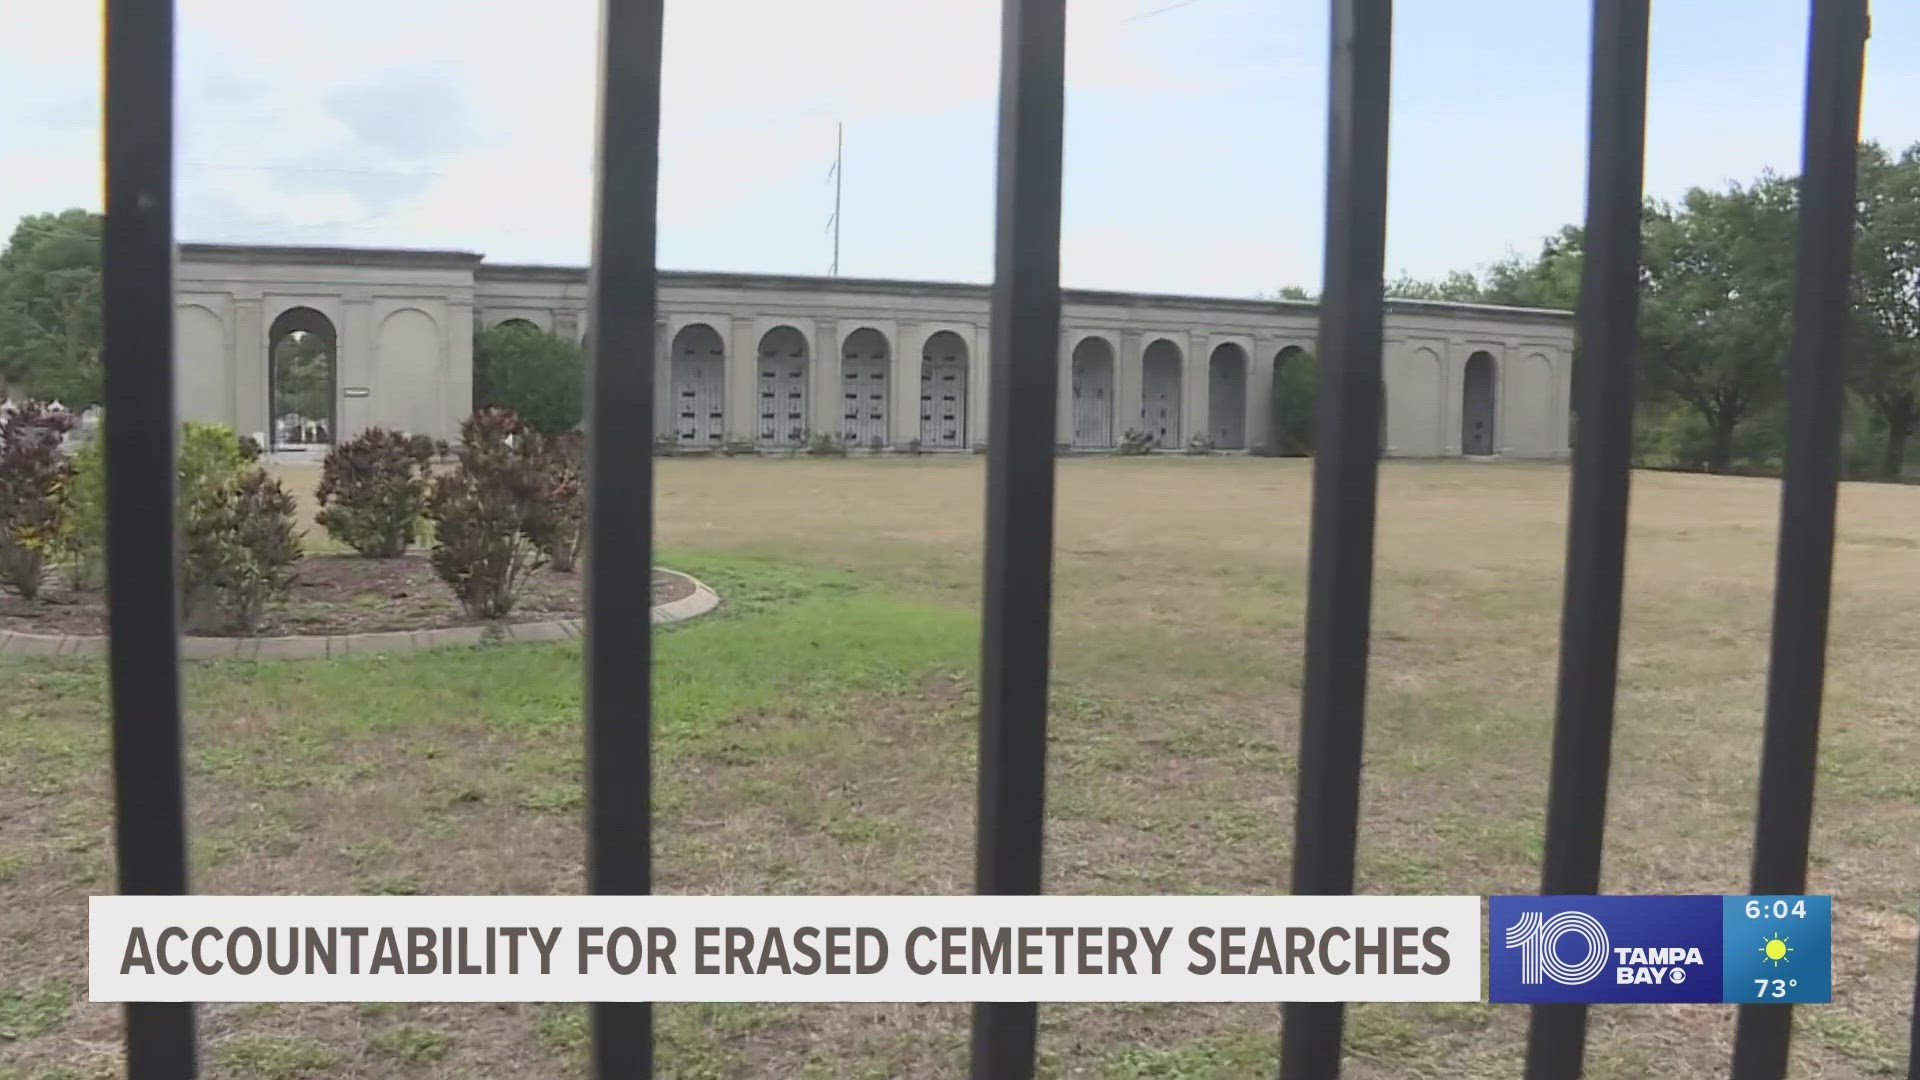 There are calls for action at Marti-Colon Cemetery and the erased College Hill Cemetery.